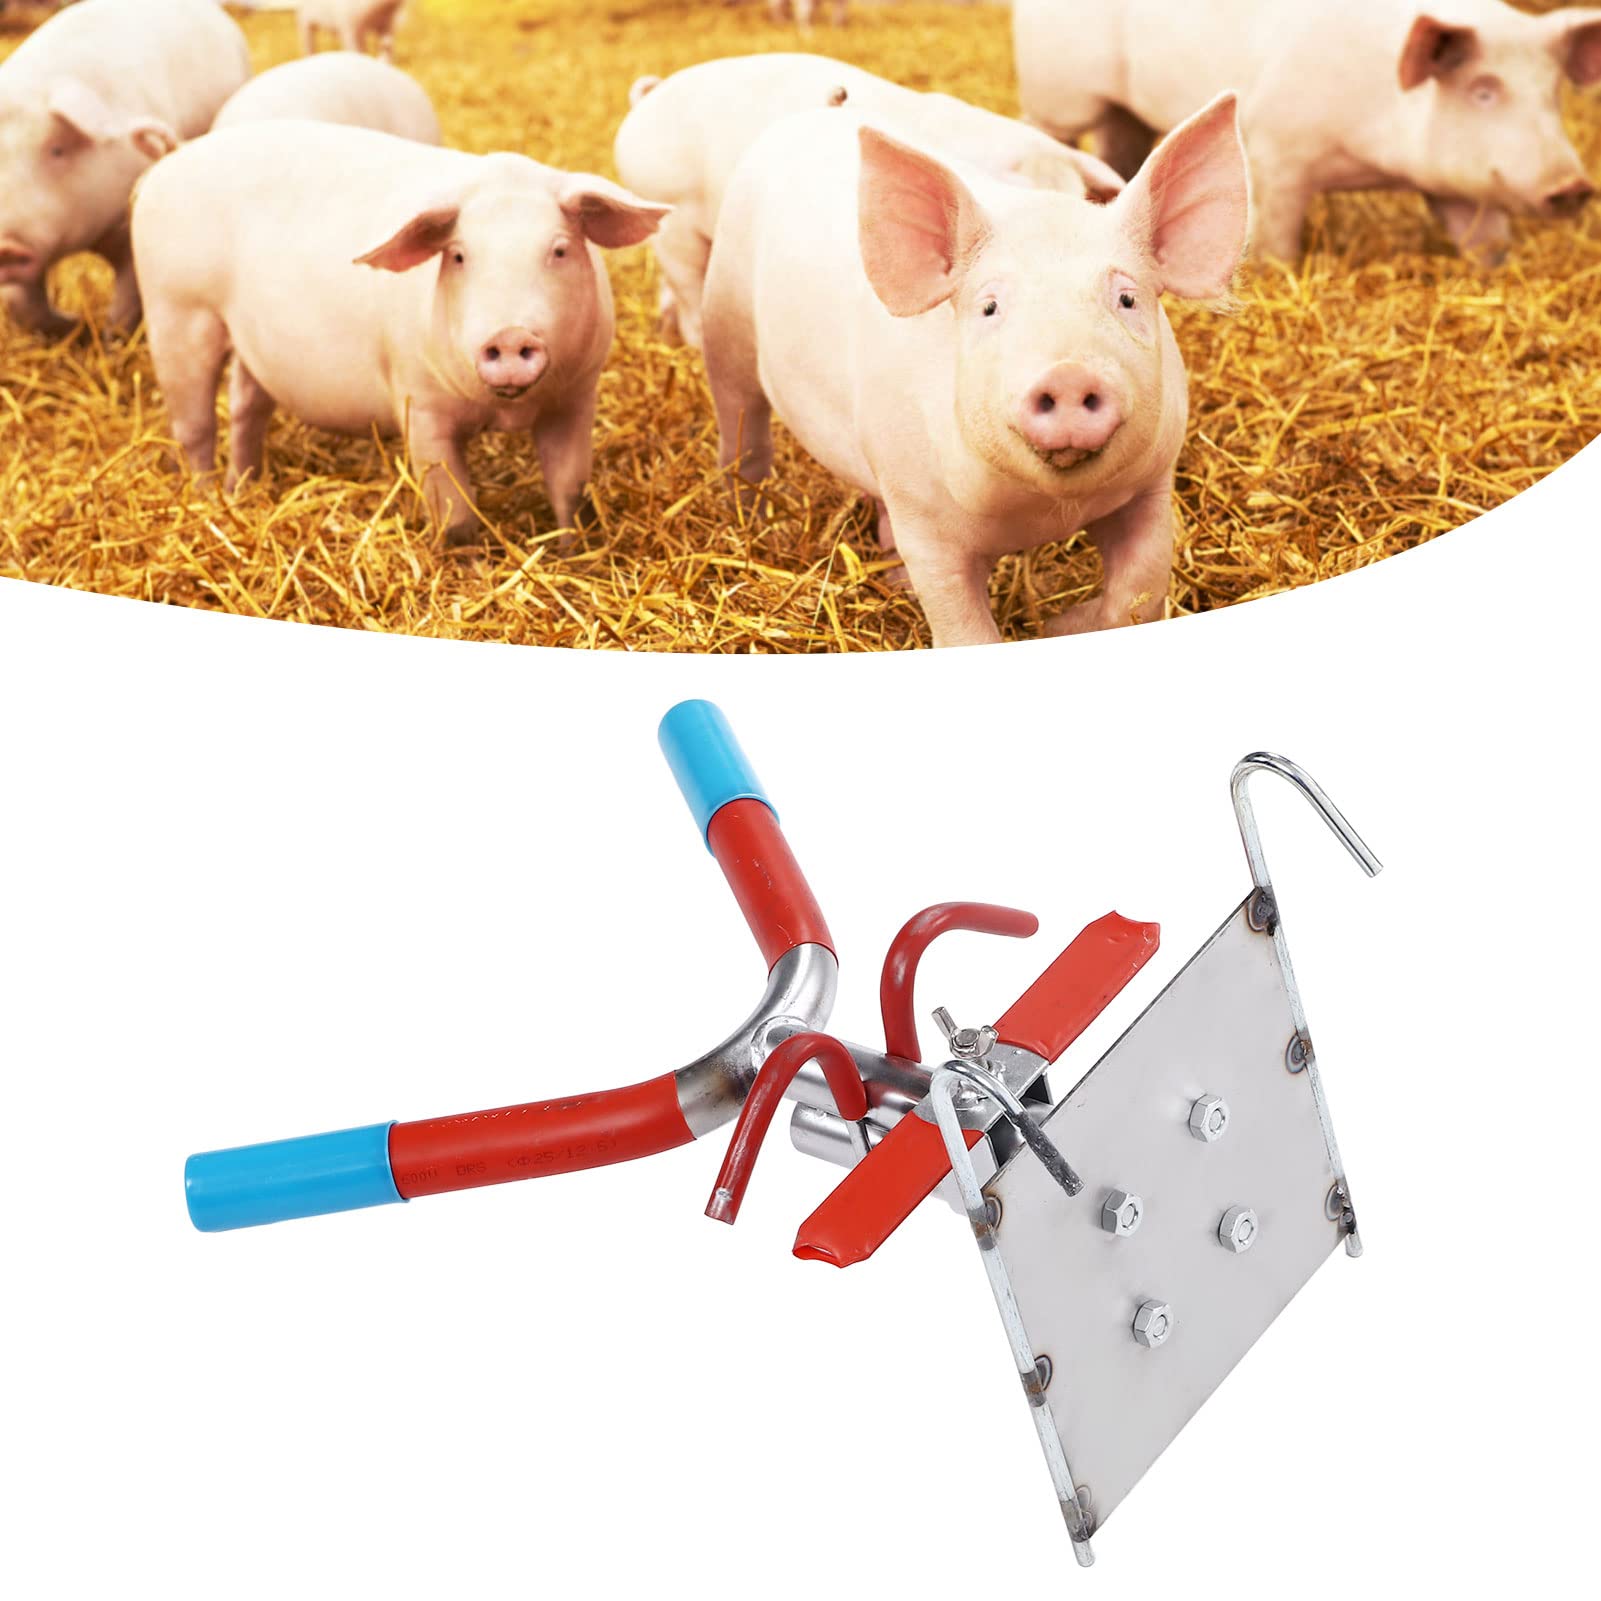 Piglet Castration with Durable Stainless Steel Rack - Convenient, Simple Operation for Efficient Pig Farm